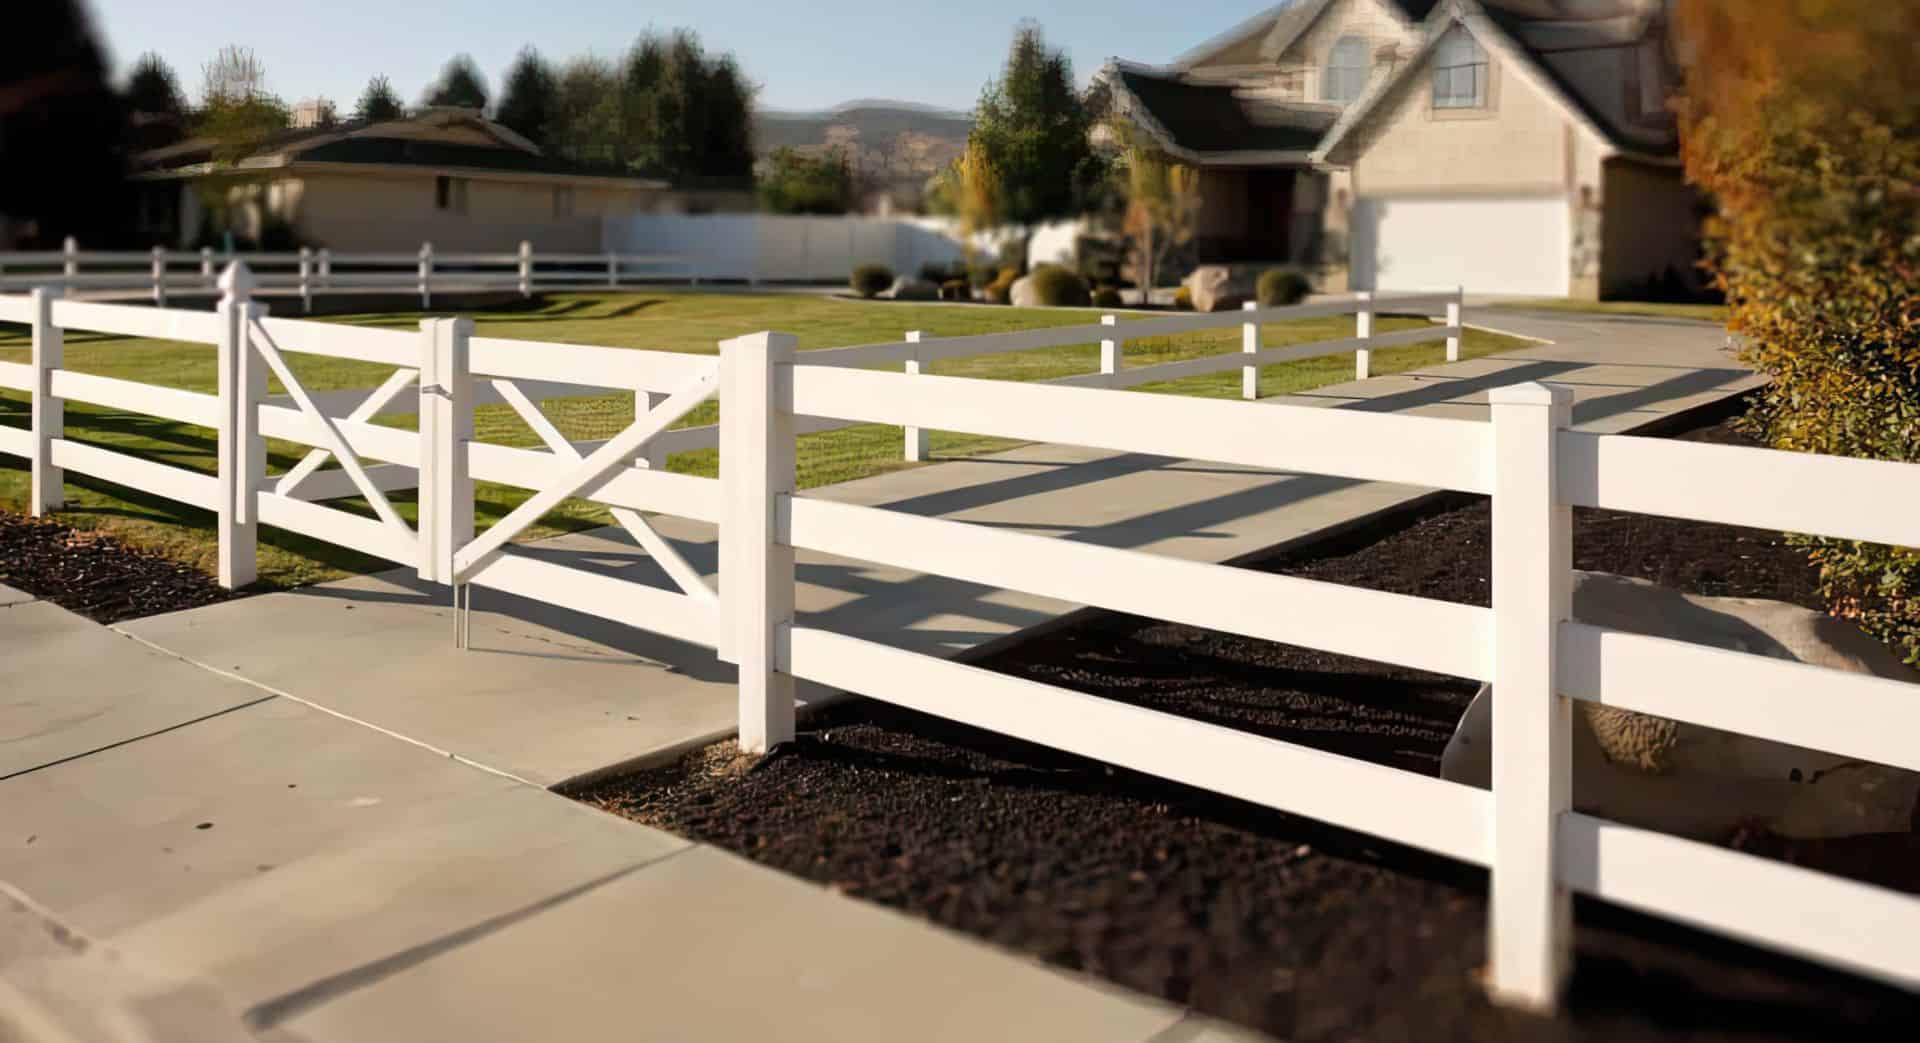 Vinyl cross rail ranch style fence on driveway leading up to modern suburban house with front lawn, garden and many trees